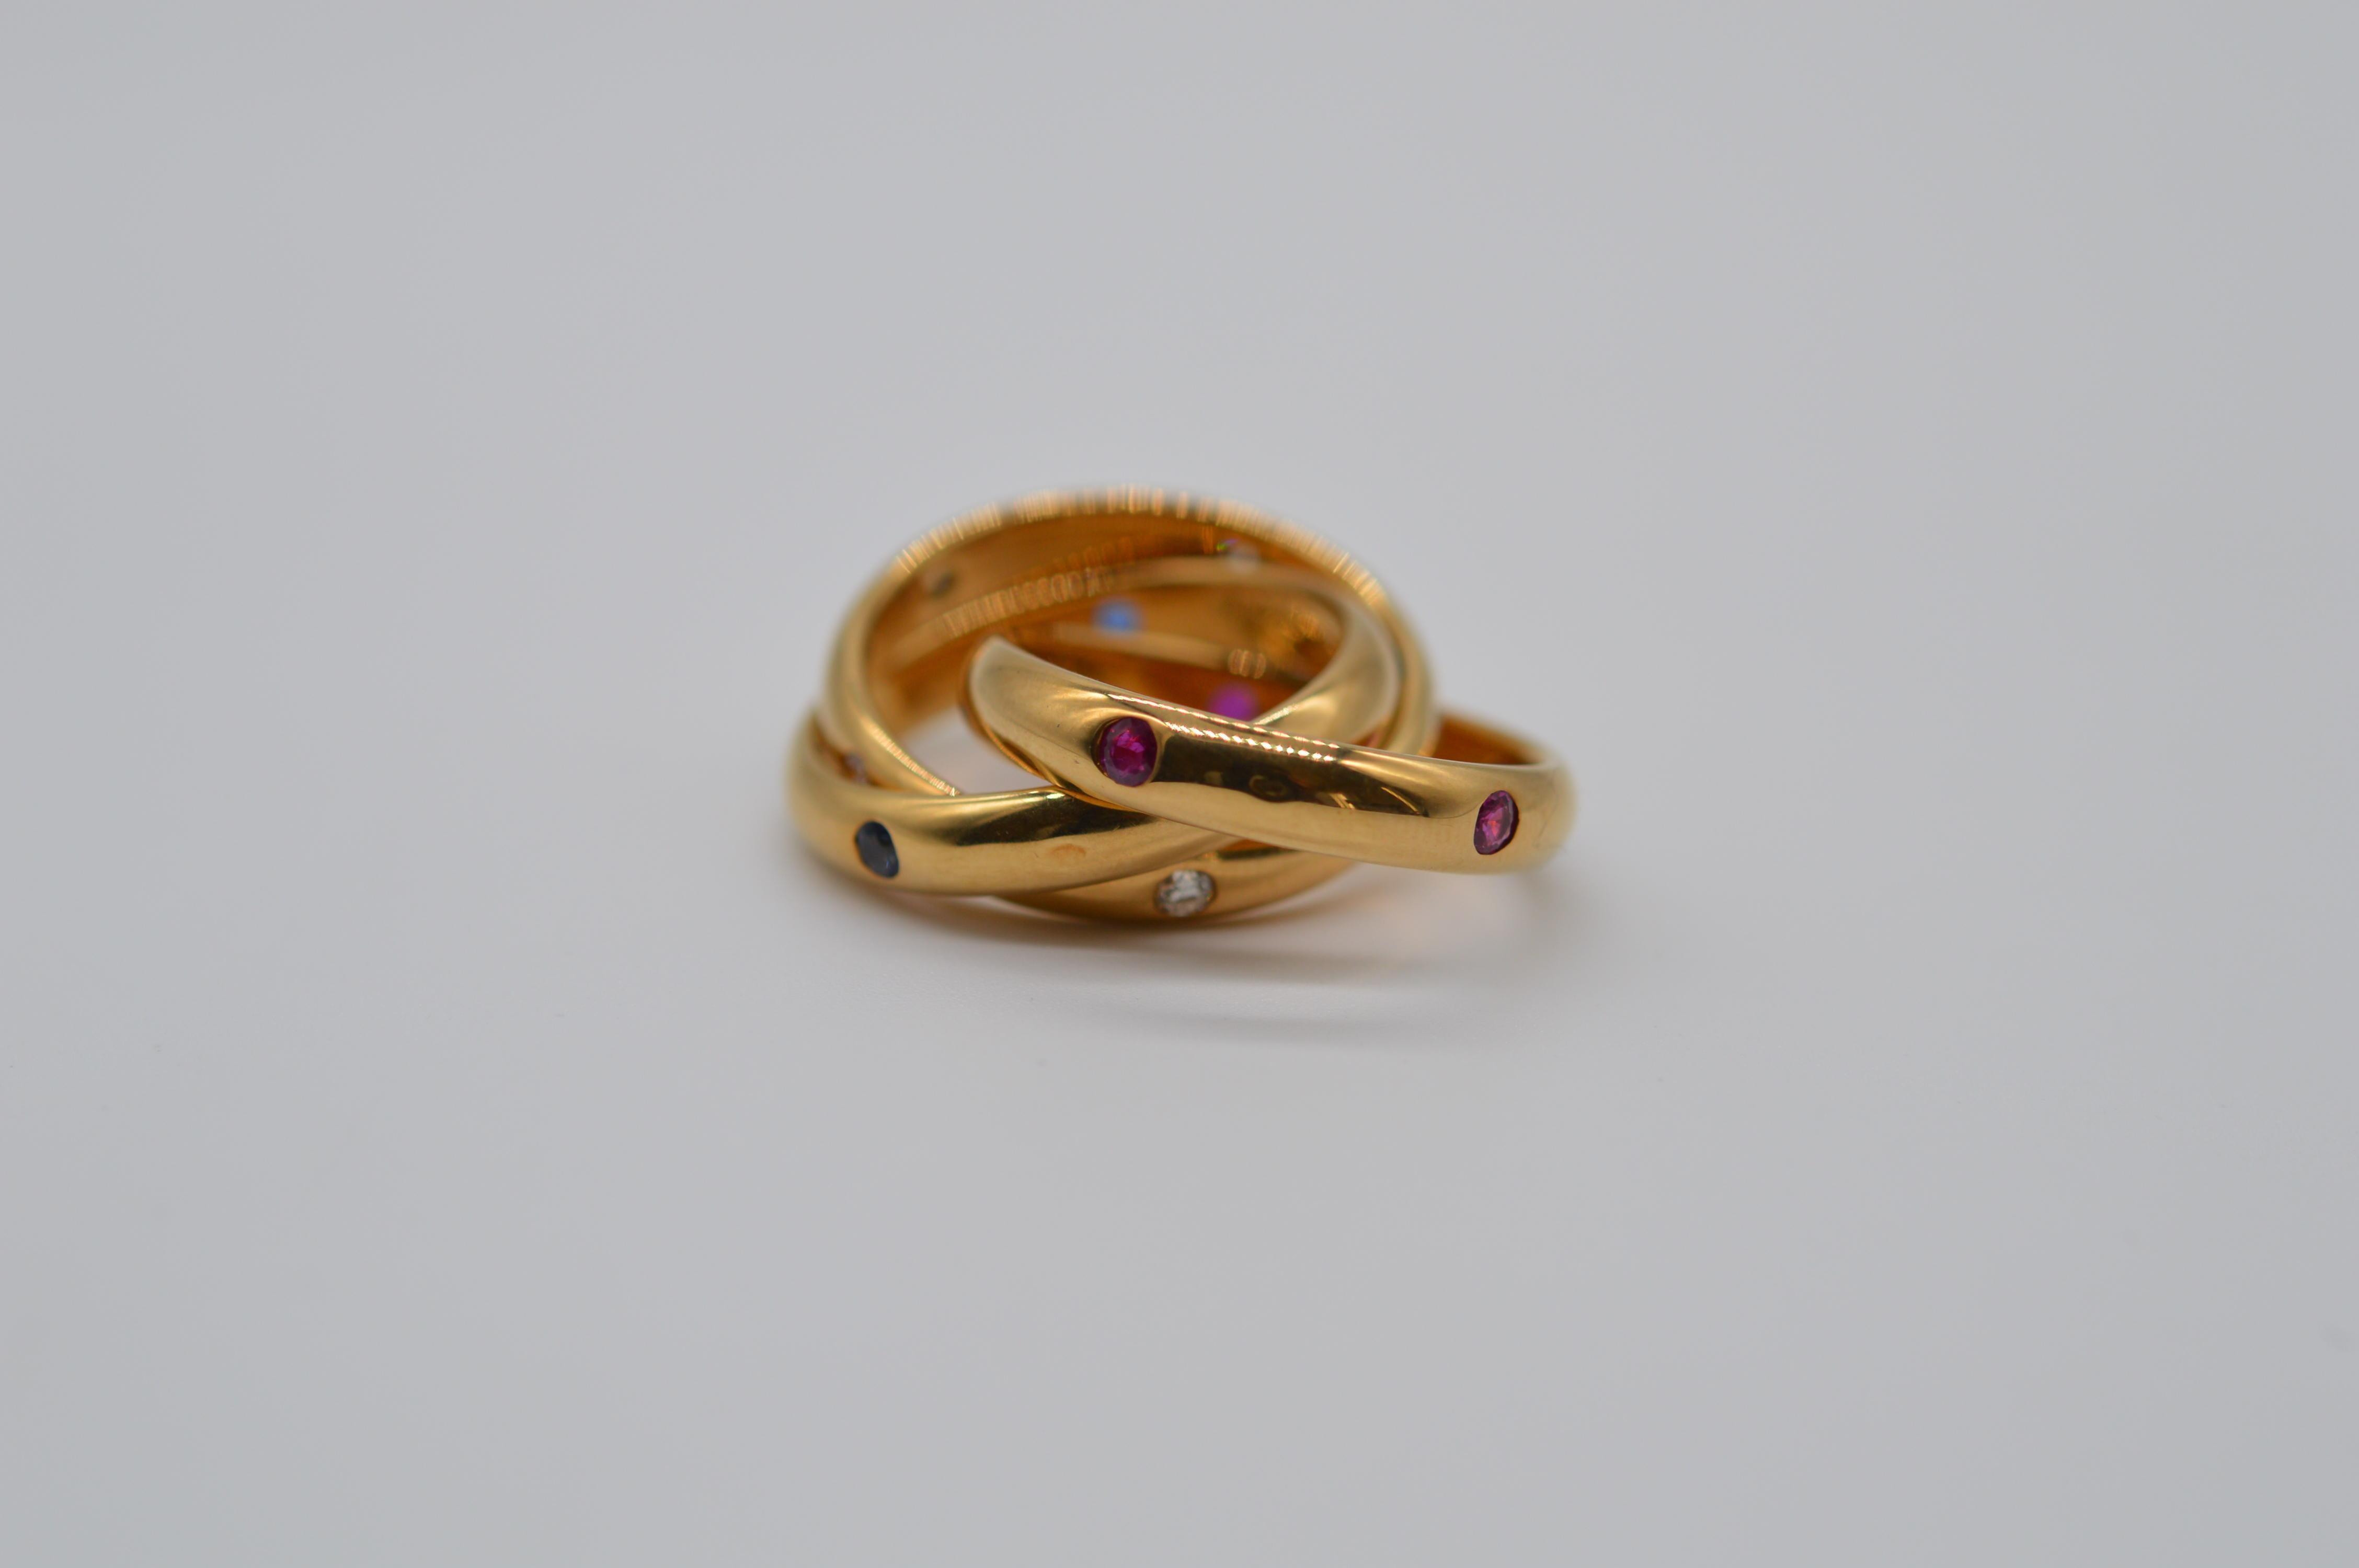 Round Cut Cartier Trinity 18K Yellow Gold Ring with Diamonds, Rubys & Sapphires Unworn